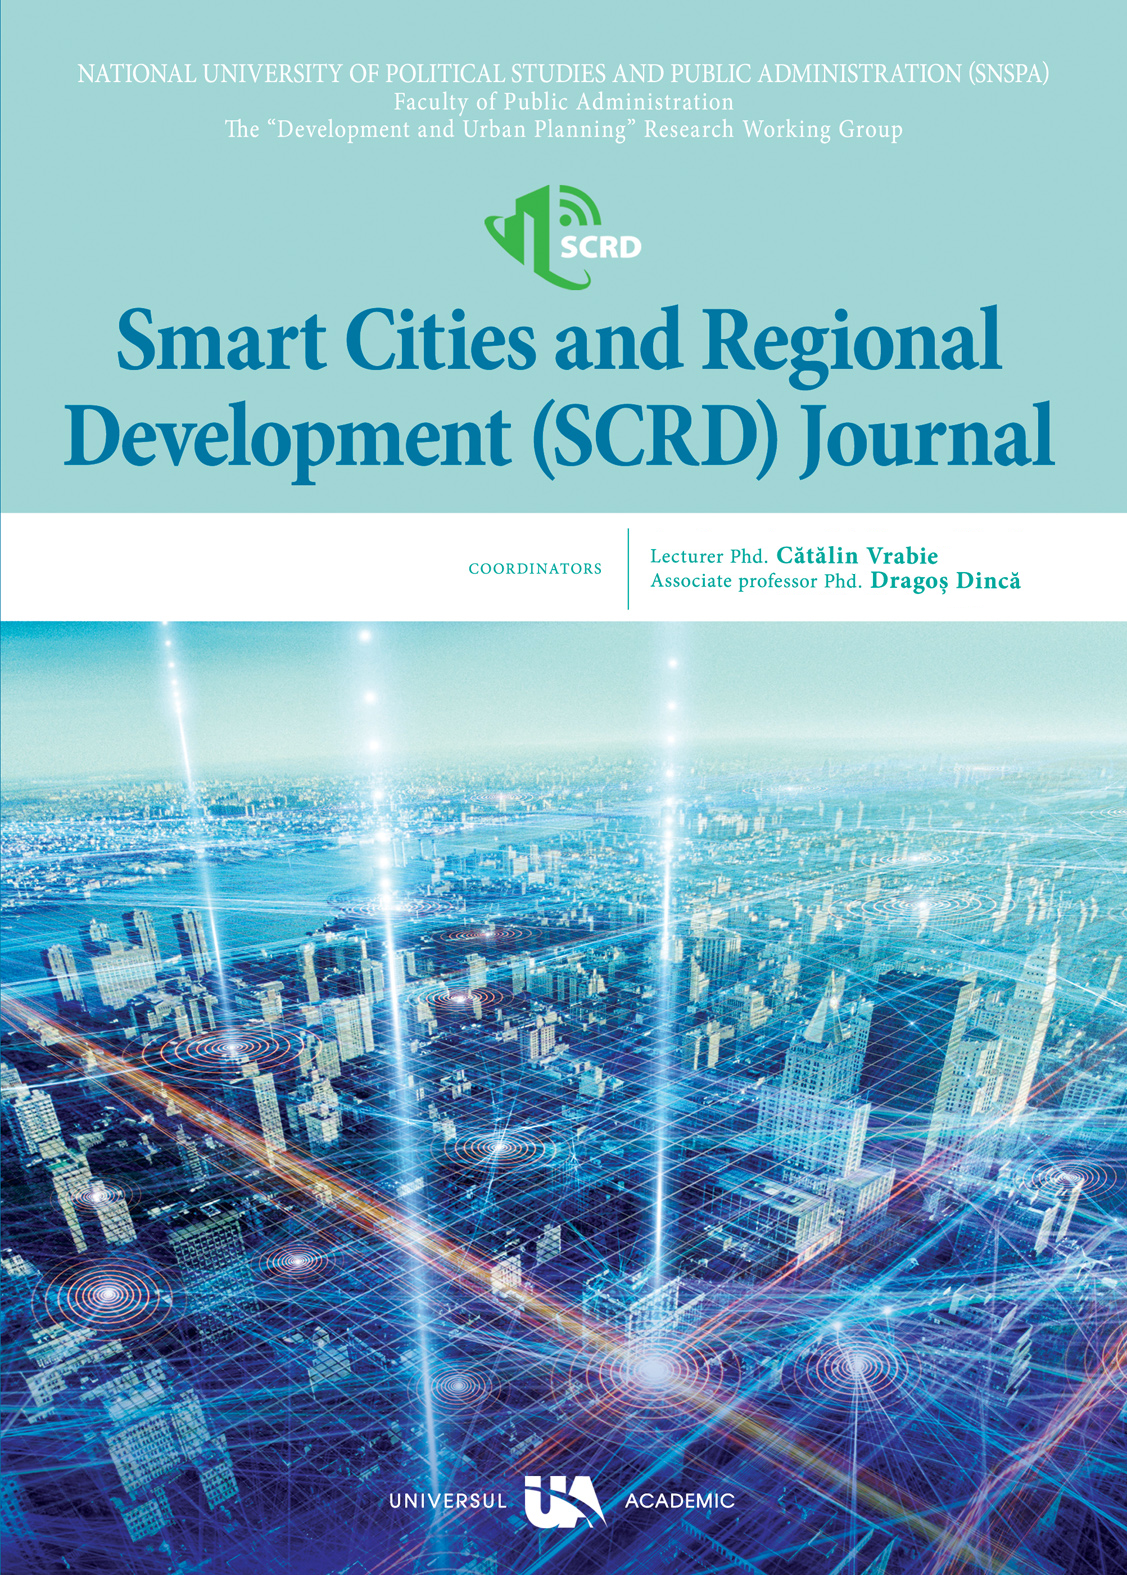 Ways for assessment of the potential for development of the so called “smart cities”